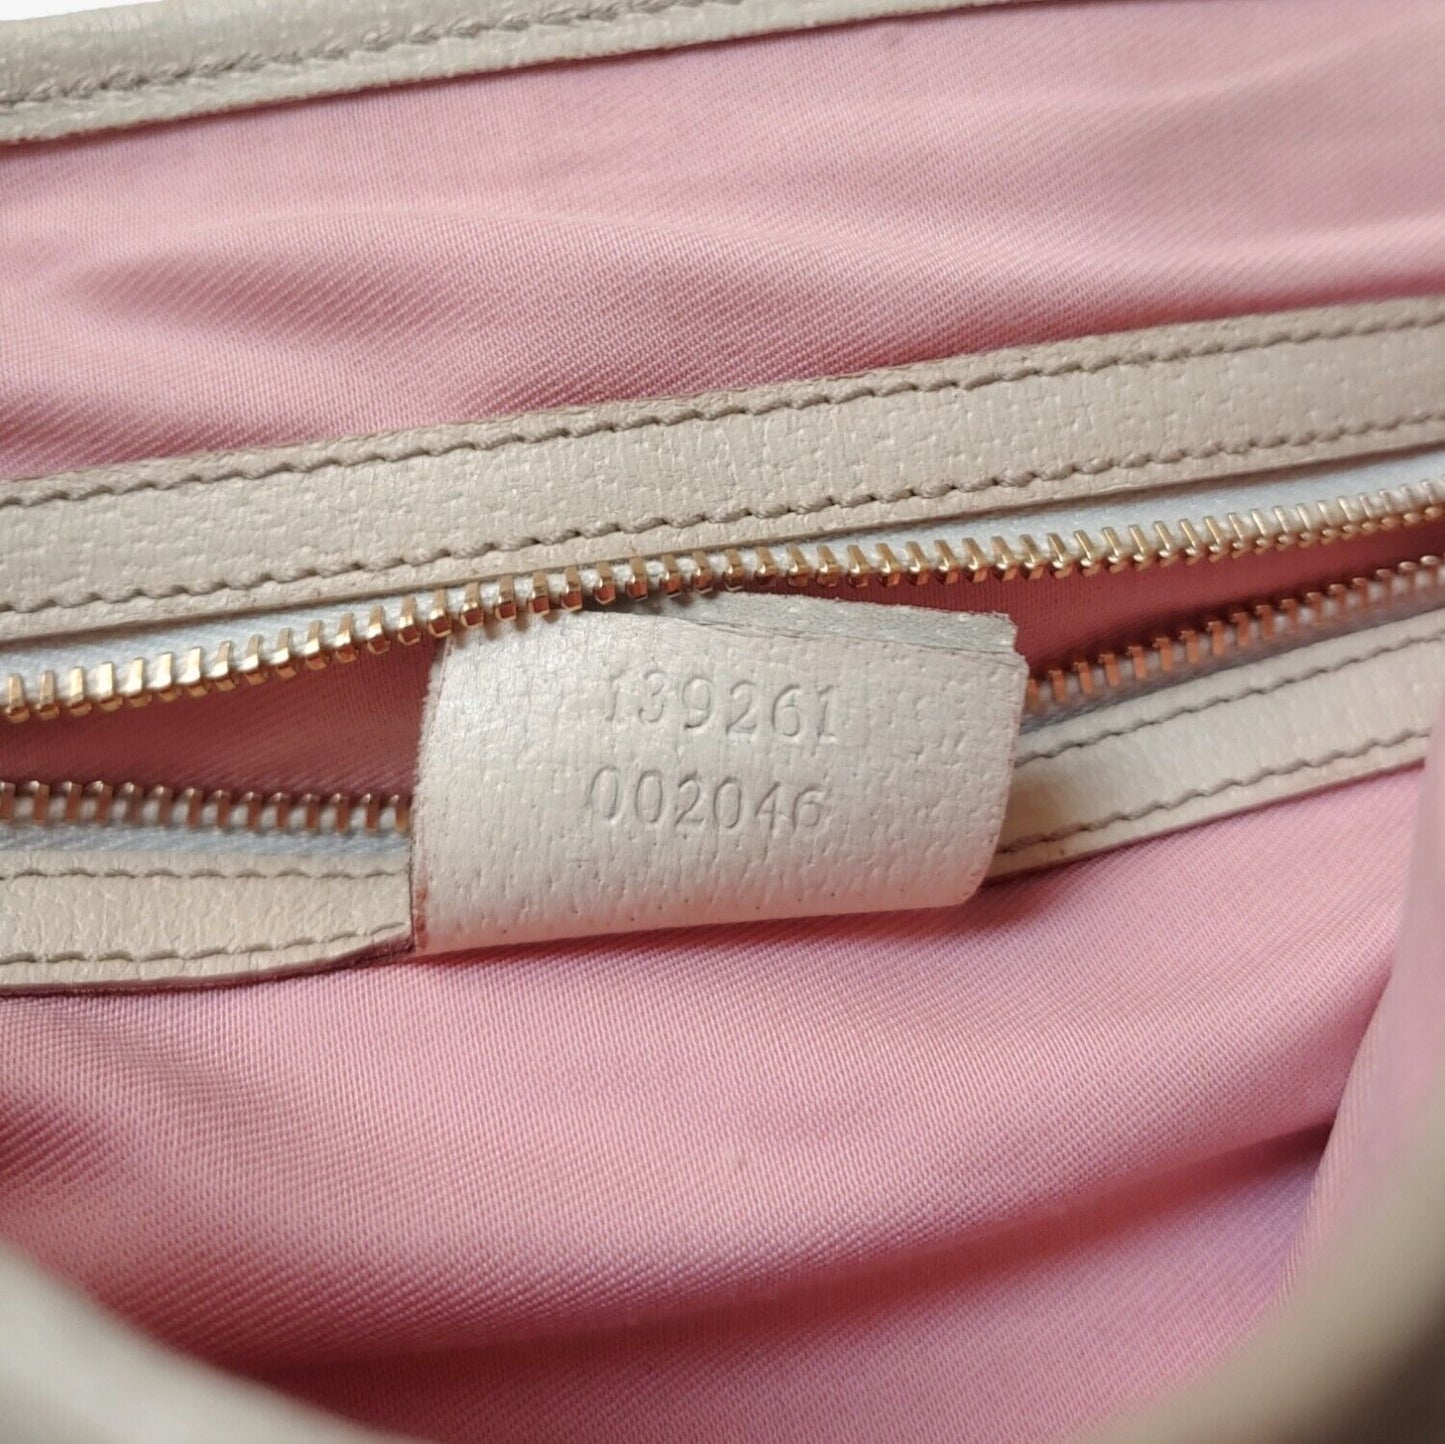 Vintage 90s Gucci GG Small Pink Canvas Handbag With Leather Handles 139261002046 Authentic Code - Casspios Dream